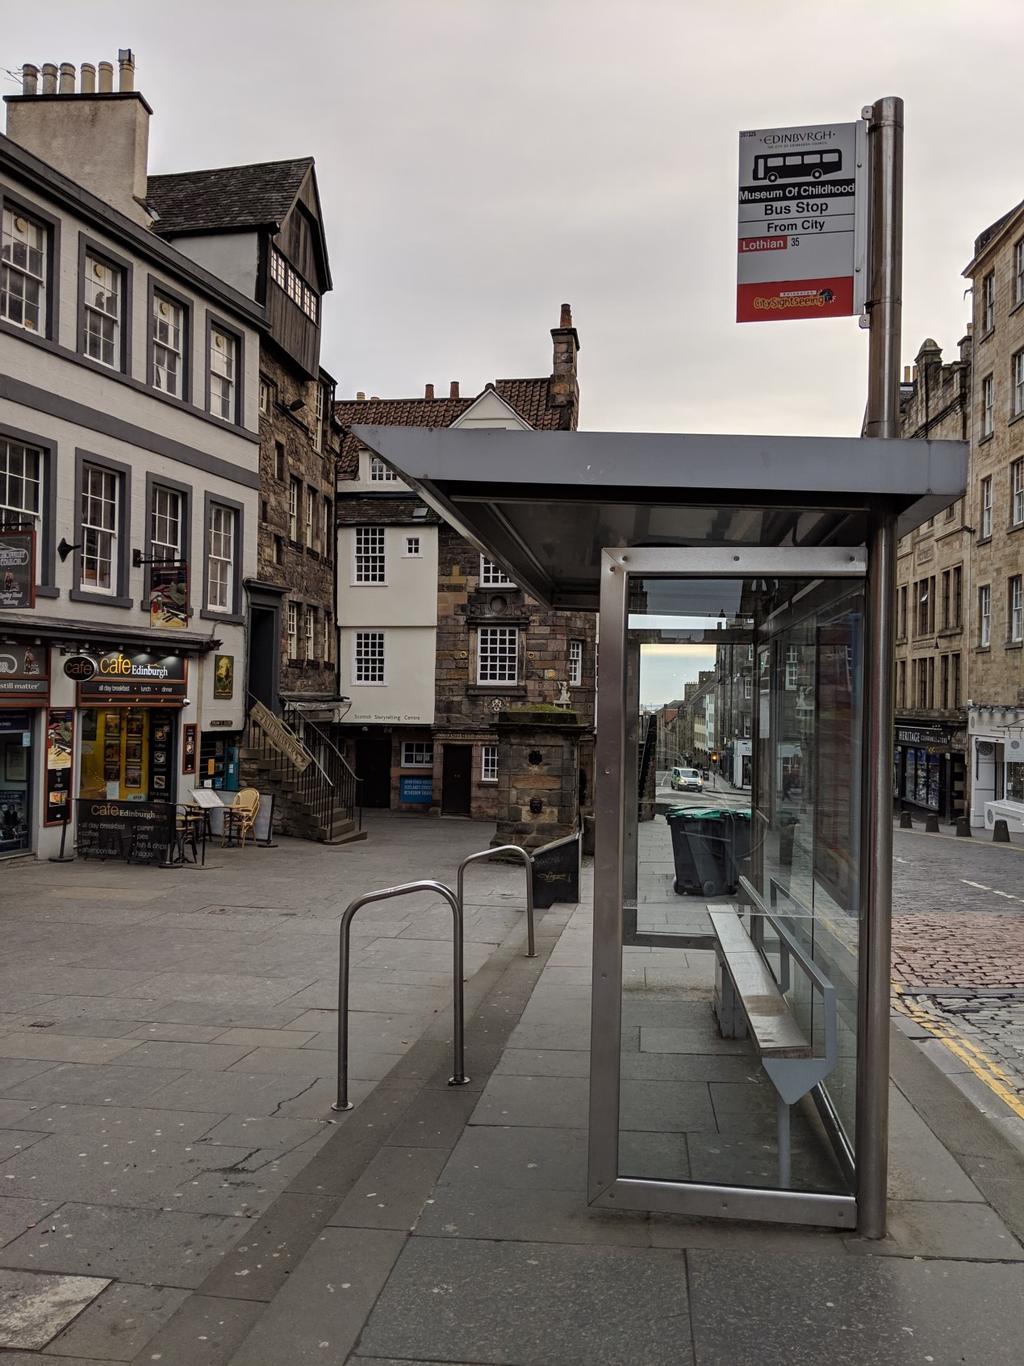 The photo shows the level access alternative to using steps at this bus stop.